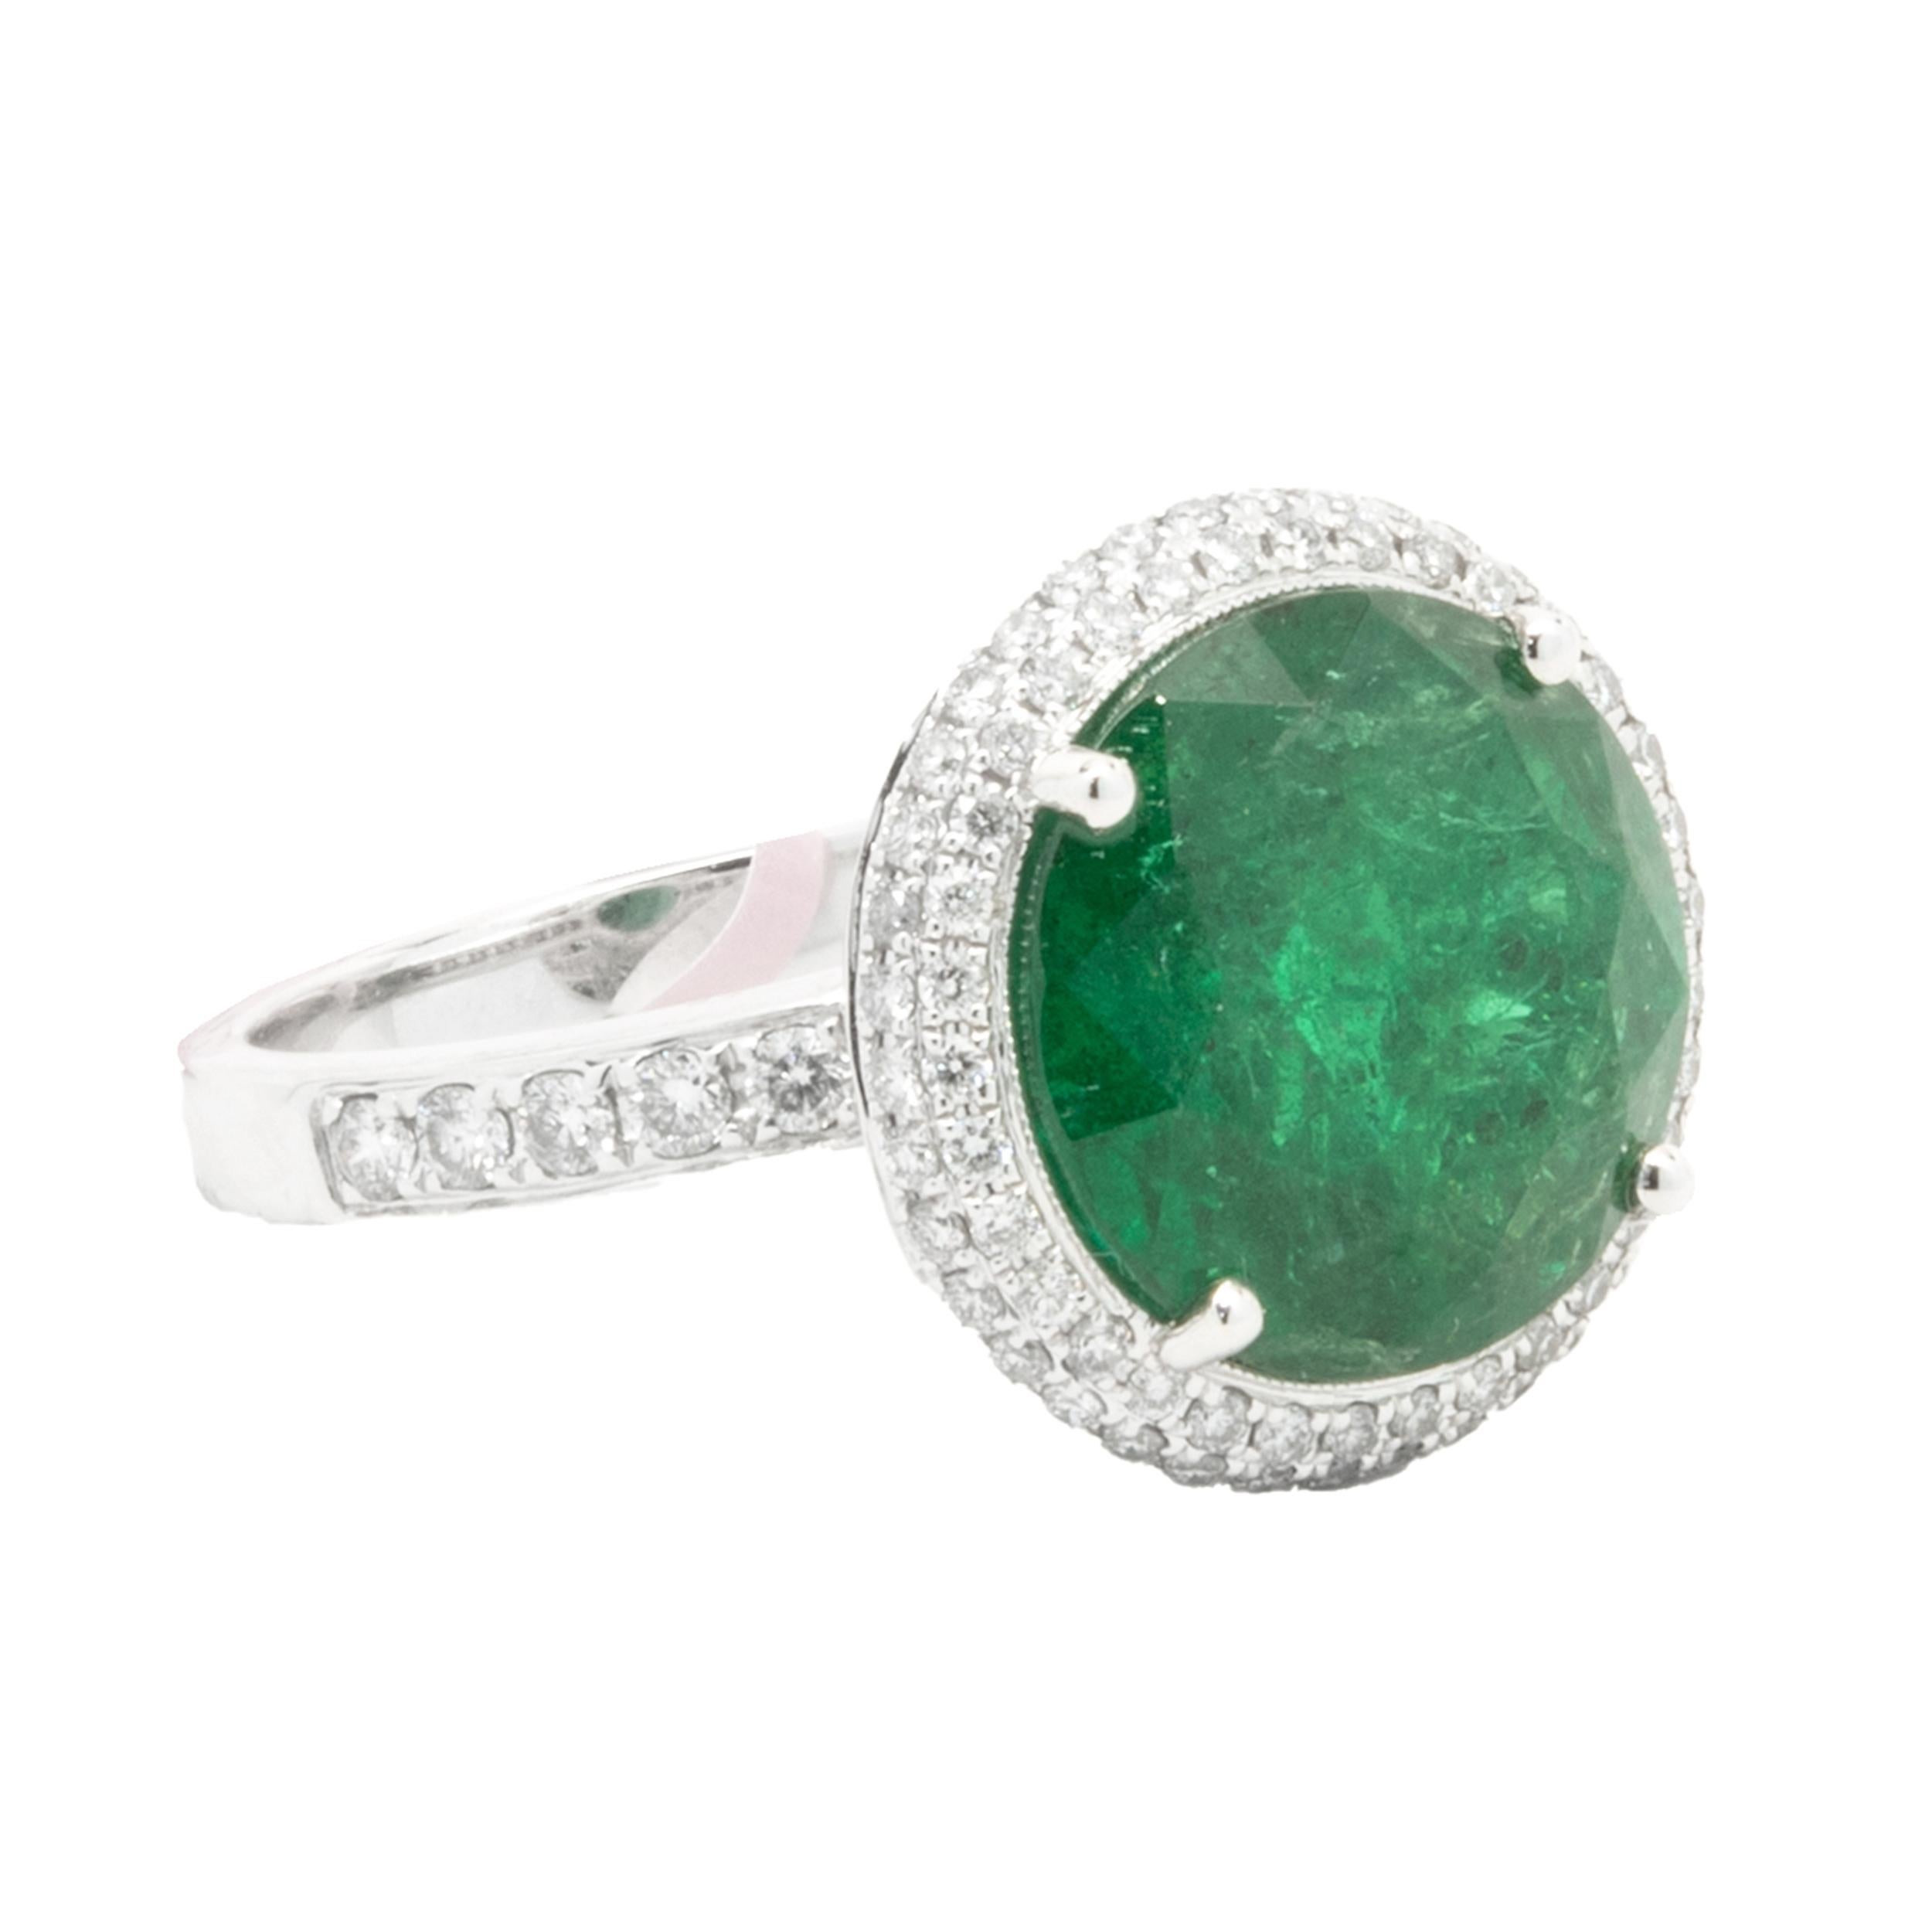 Designer: custom
Material: 18K white gold
Diamond: 174 round brilliant cut = 0.93cttw
Color: G
Clarity: VS2
Emerald: 1 round cut = 7.85ct
Ring Size: 6.5 (complimentary sizing available)
Weight: 8.16 grams